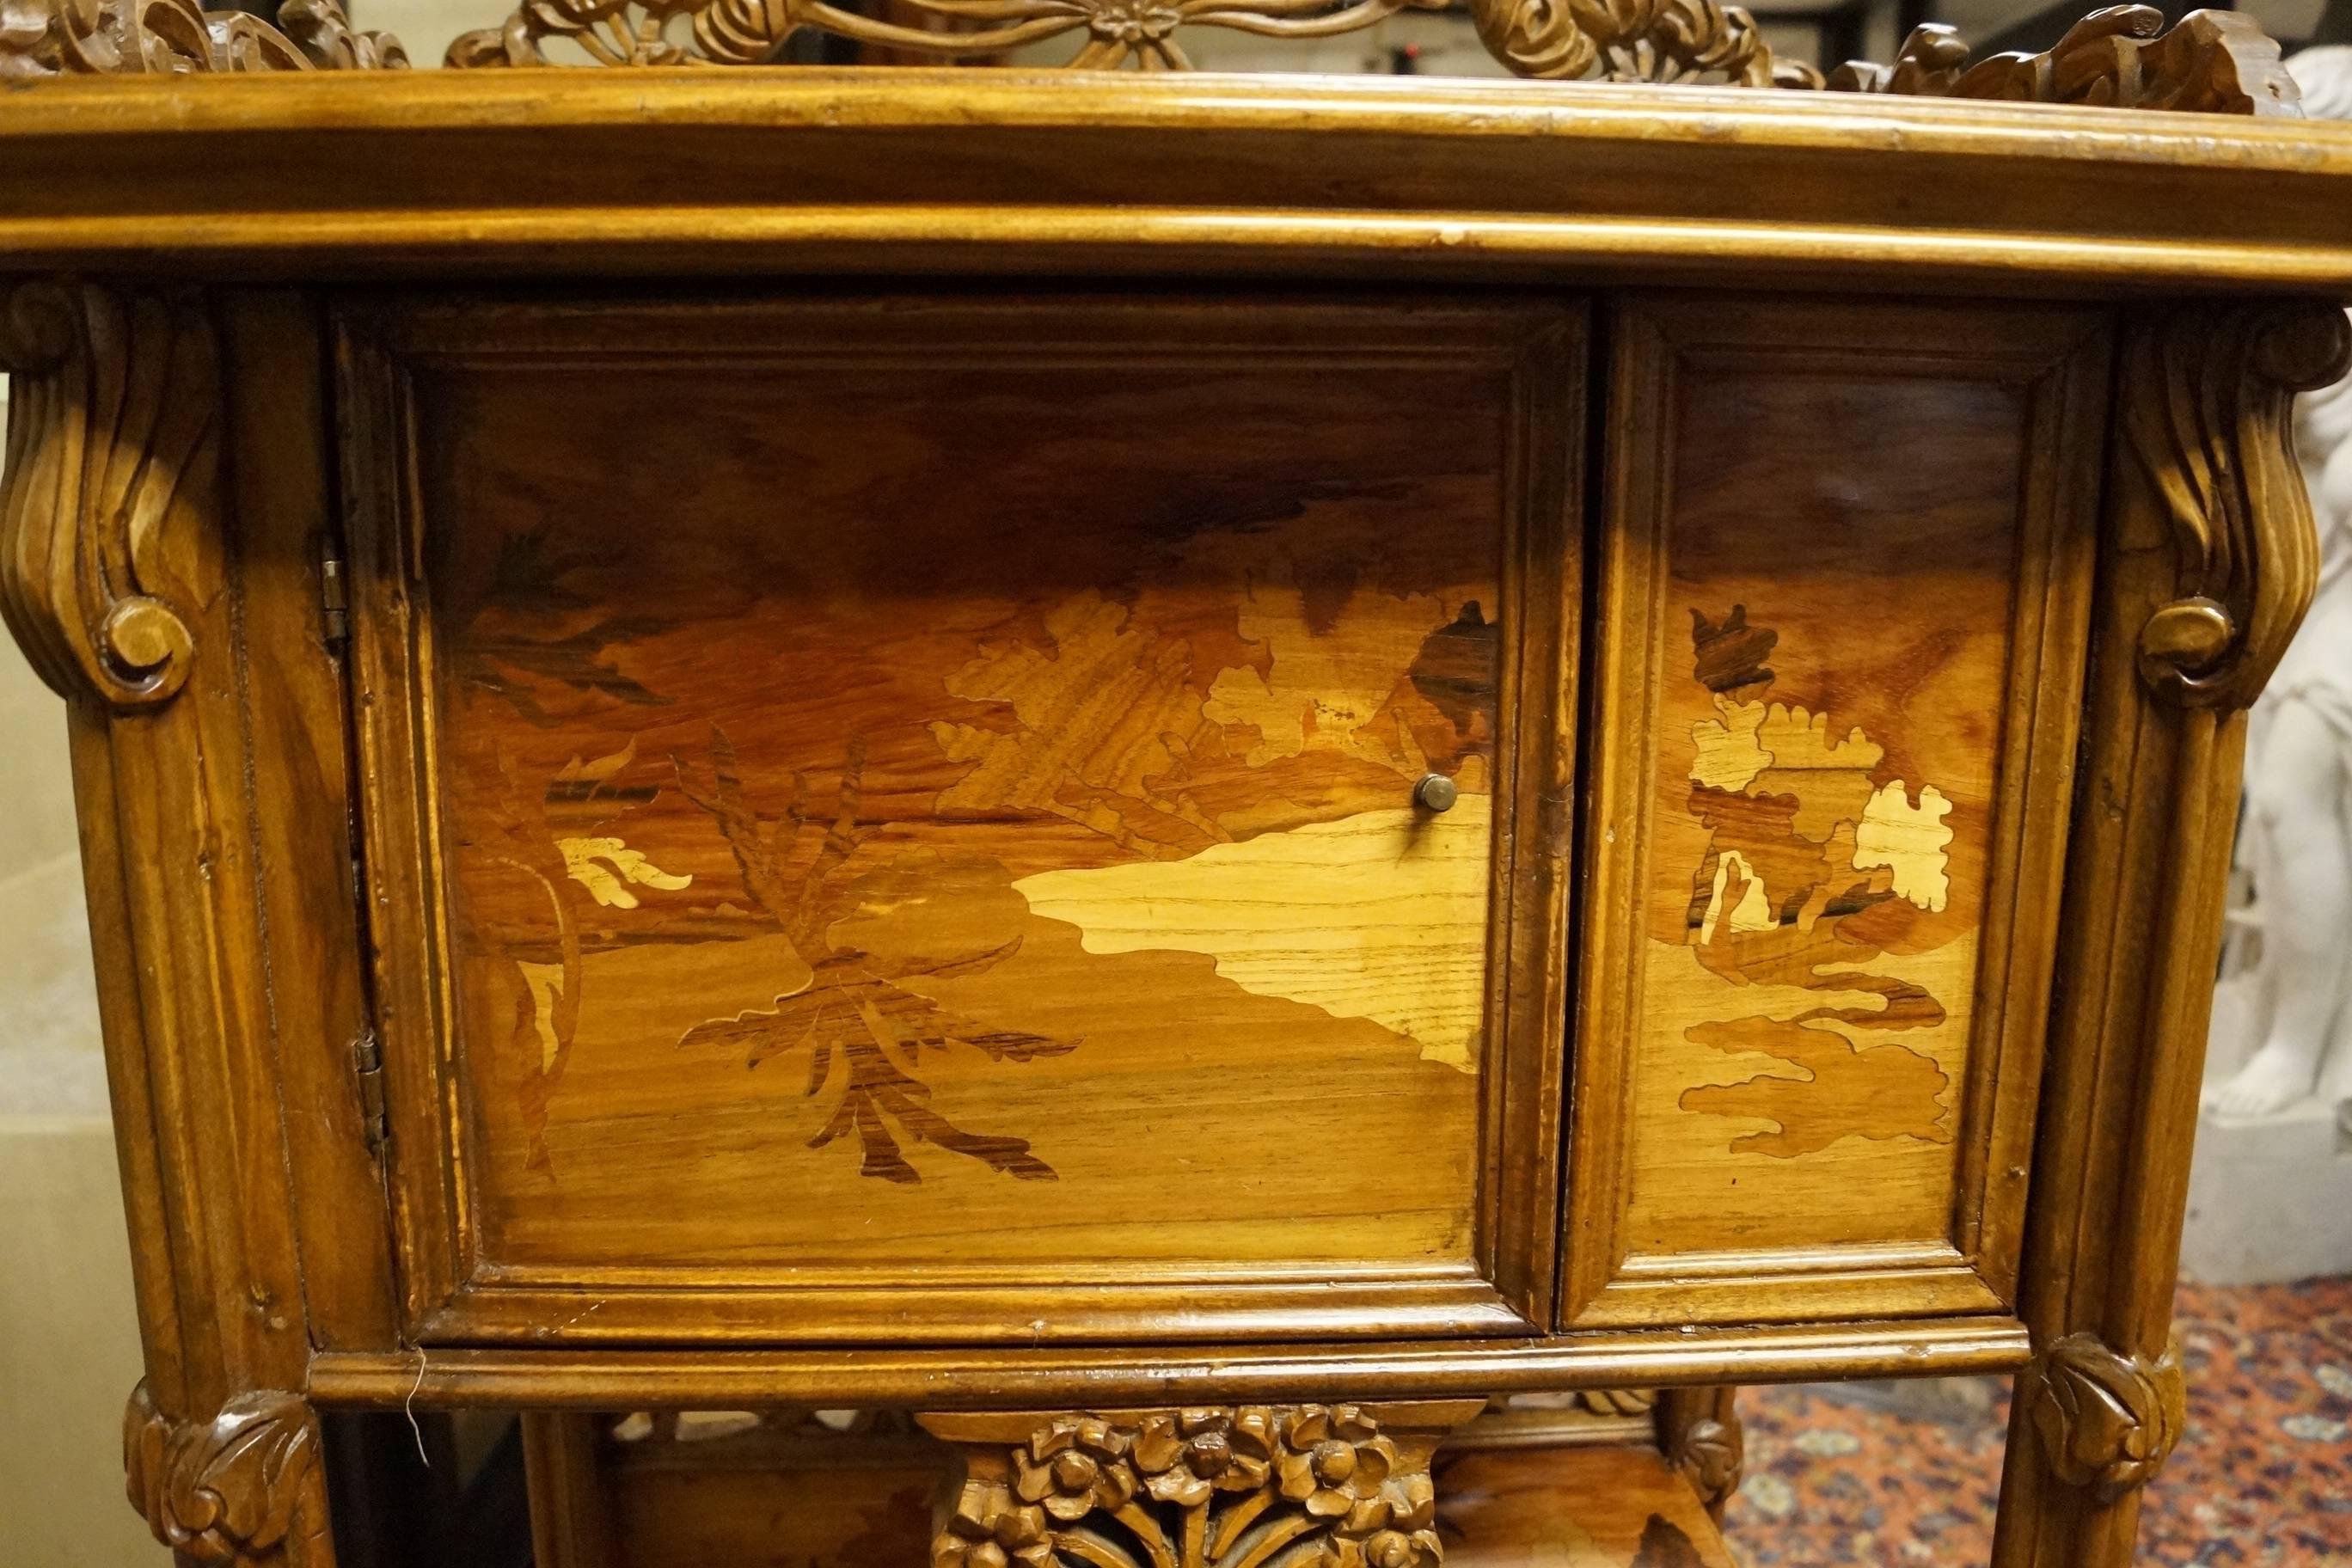  Pair of   Marquetry Inlaid Display Cabinets with Floral Design 1